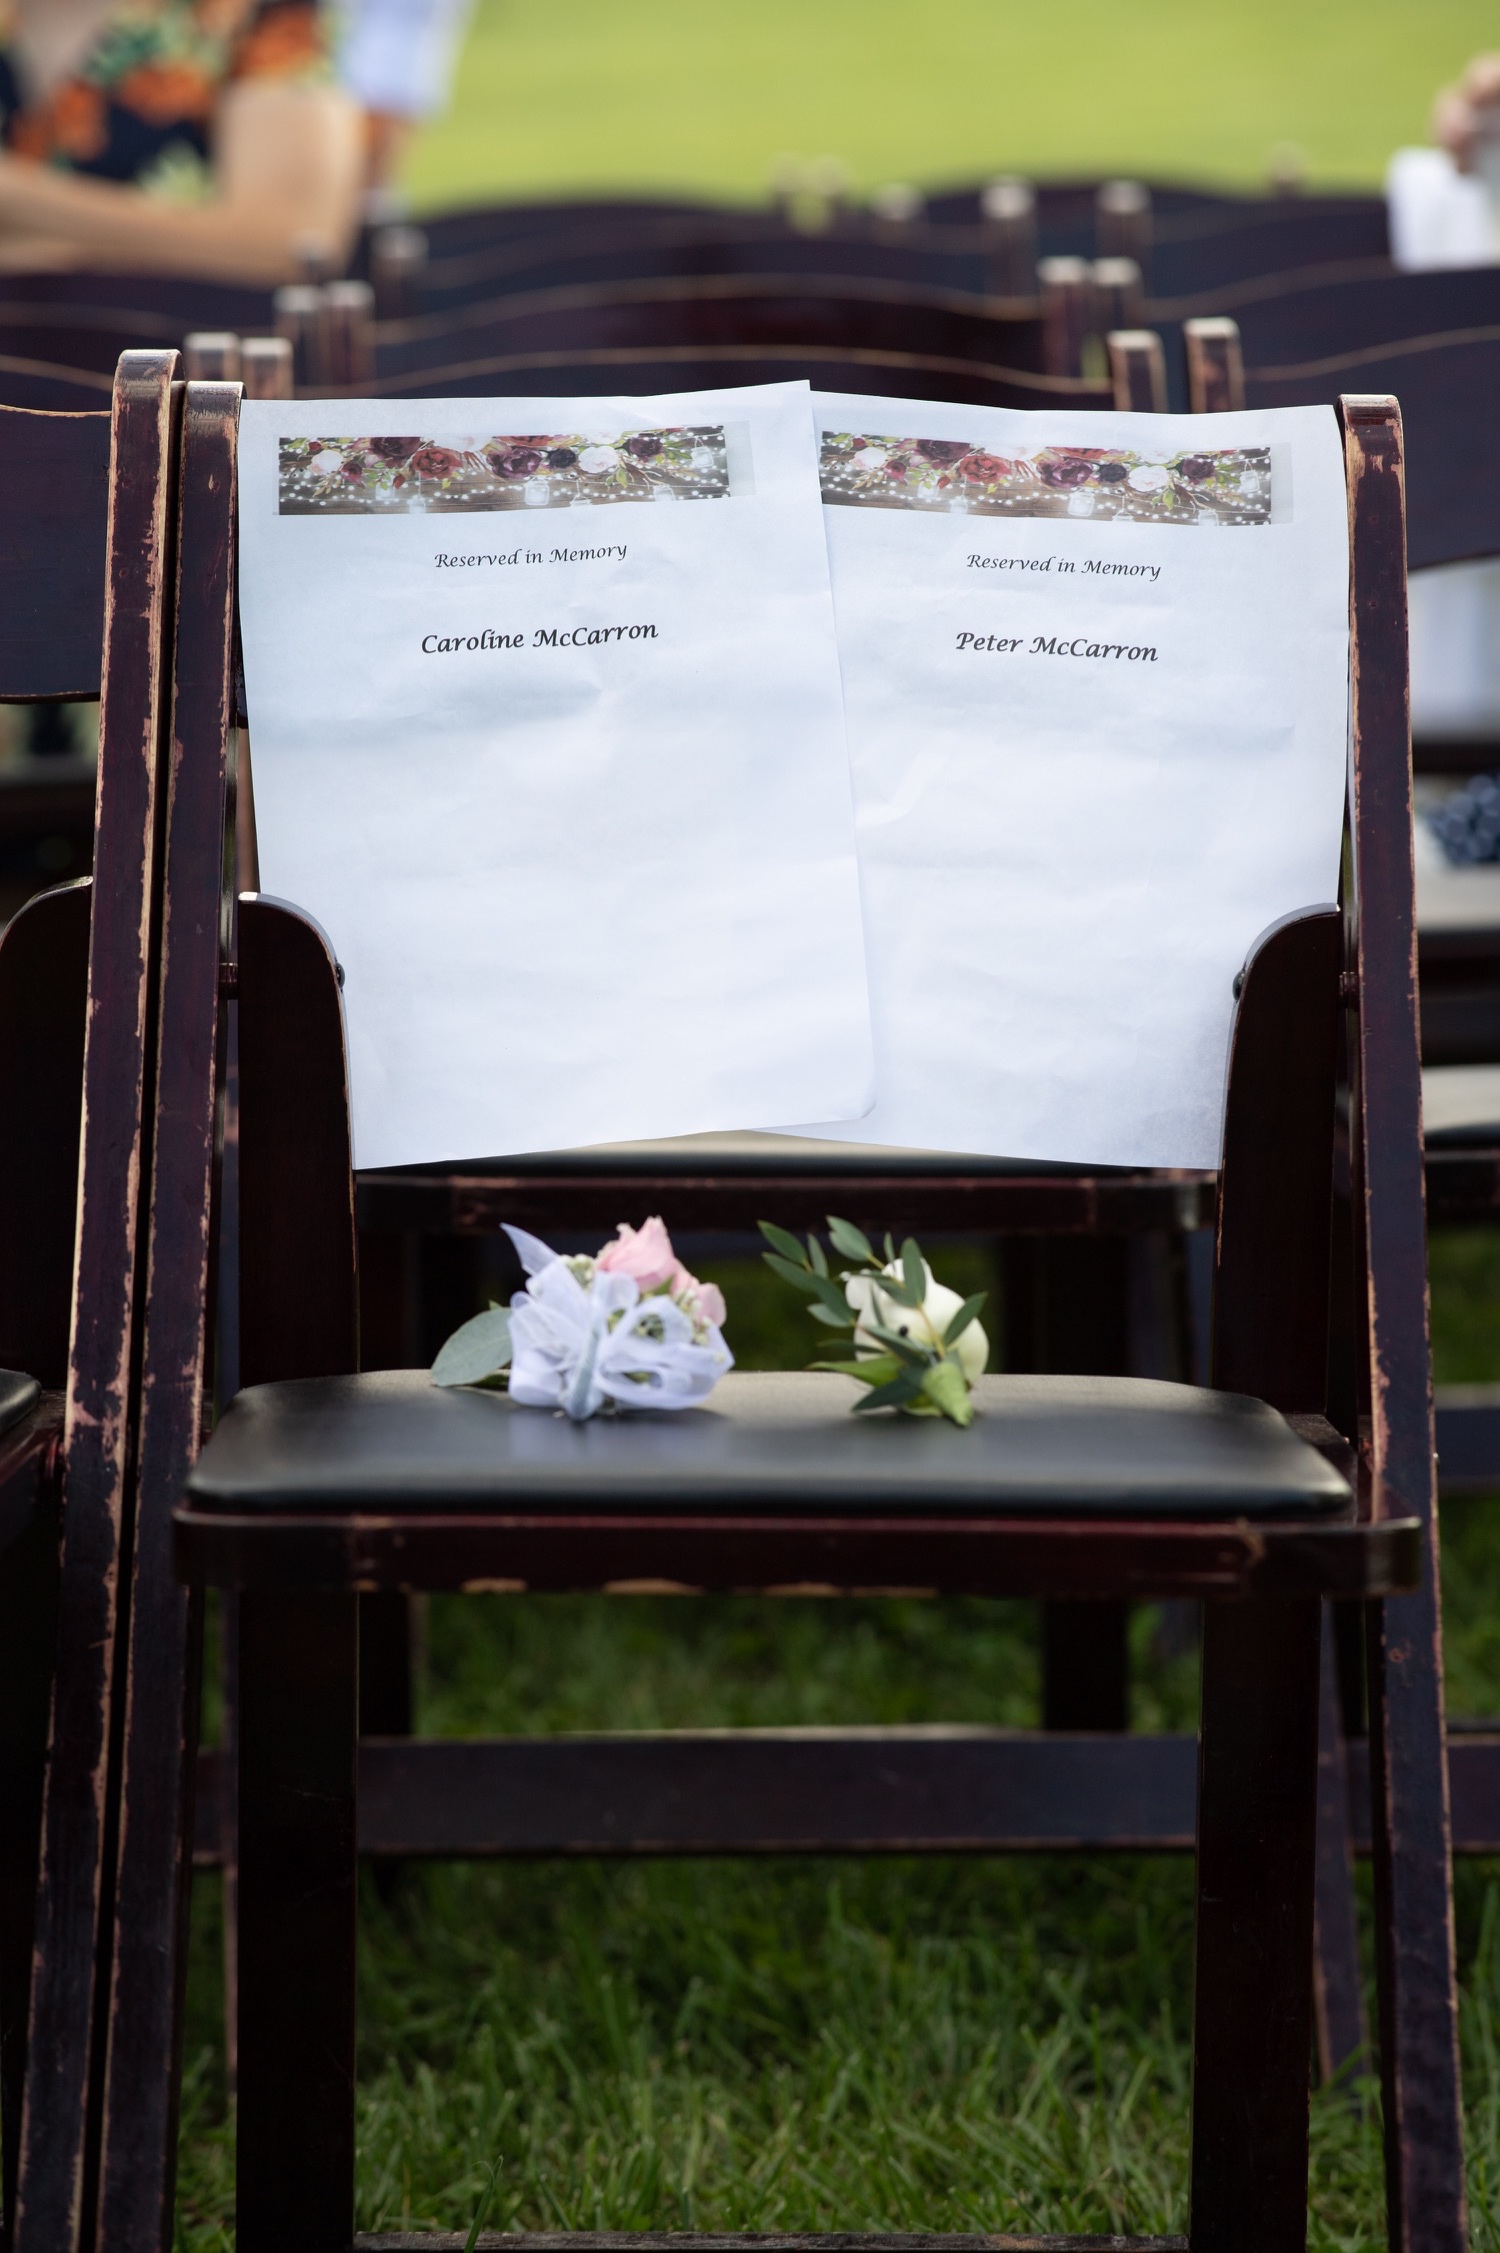 Wedding remembrance chair, Honor passed family wedding, Wedding ceremony, Virginia Wedding, Virginia Wedding Photographer, Winery Wedding in Virginia, Vineyard Wedding in Virginia, Vineyard Wedding Near Washington DC, Weddings near Washington DC, VA Wedding Photographer, Travel themed wedding, Wine themed wedding, wedding in a vineyard, Winery Wedding, Wedding Photography, Wedding Inspiration, Wedding ideas 